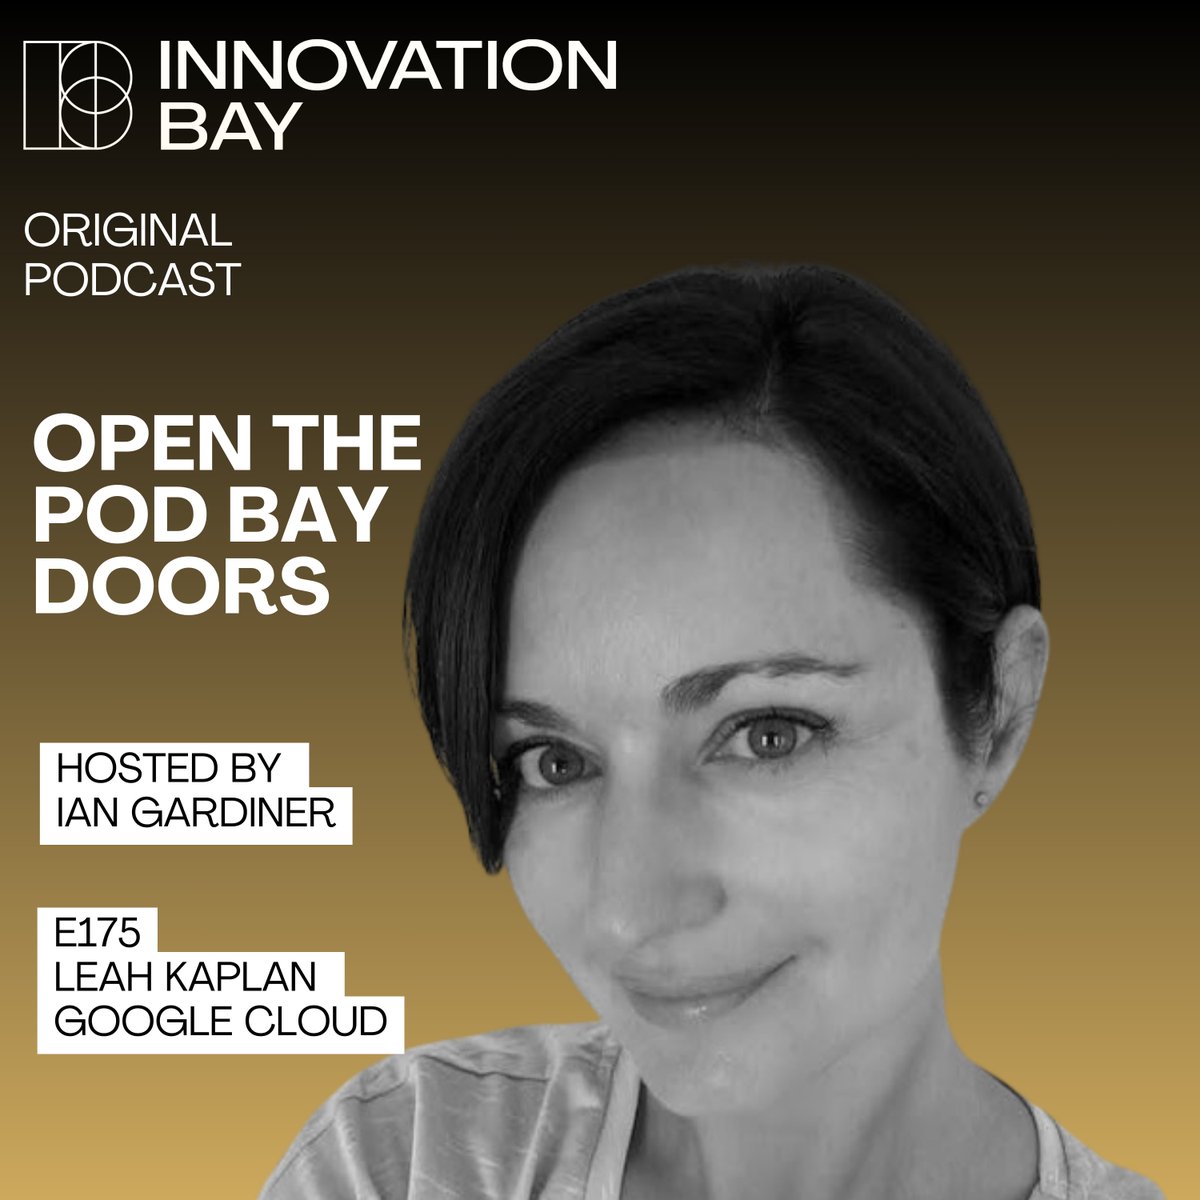 🎧 NEW OPEN THE POD BAY DOORS EPISODE LIVE Our guest this week is Leah Kaplan (@LeahSQL), APAC Sustainability Business Lead @googlecloud. Learn how Leah's impactful role helps businesses achieve their sustainability goals. Take a listen 🎧 bit.ly/OTPBDLC